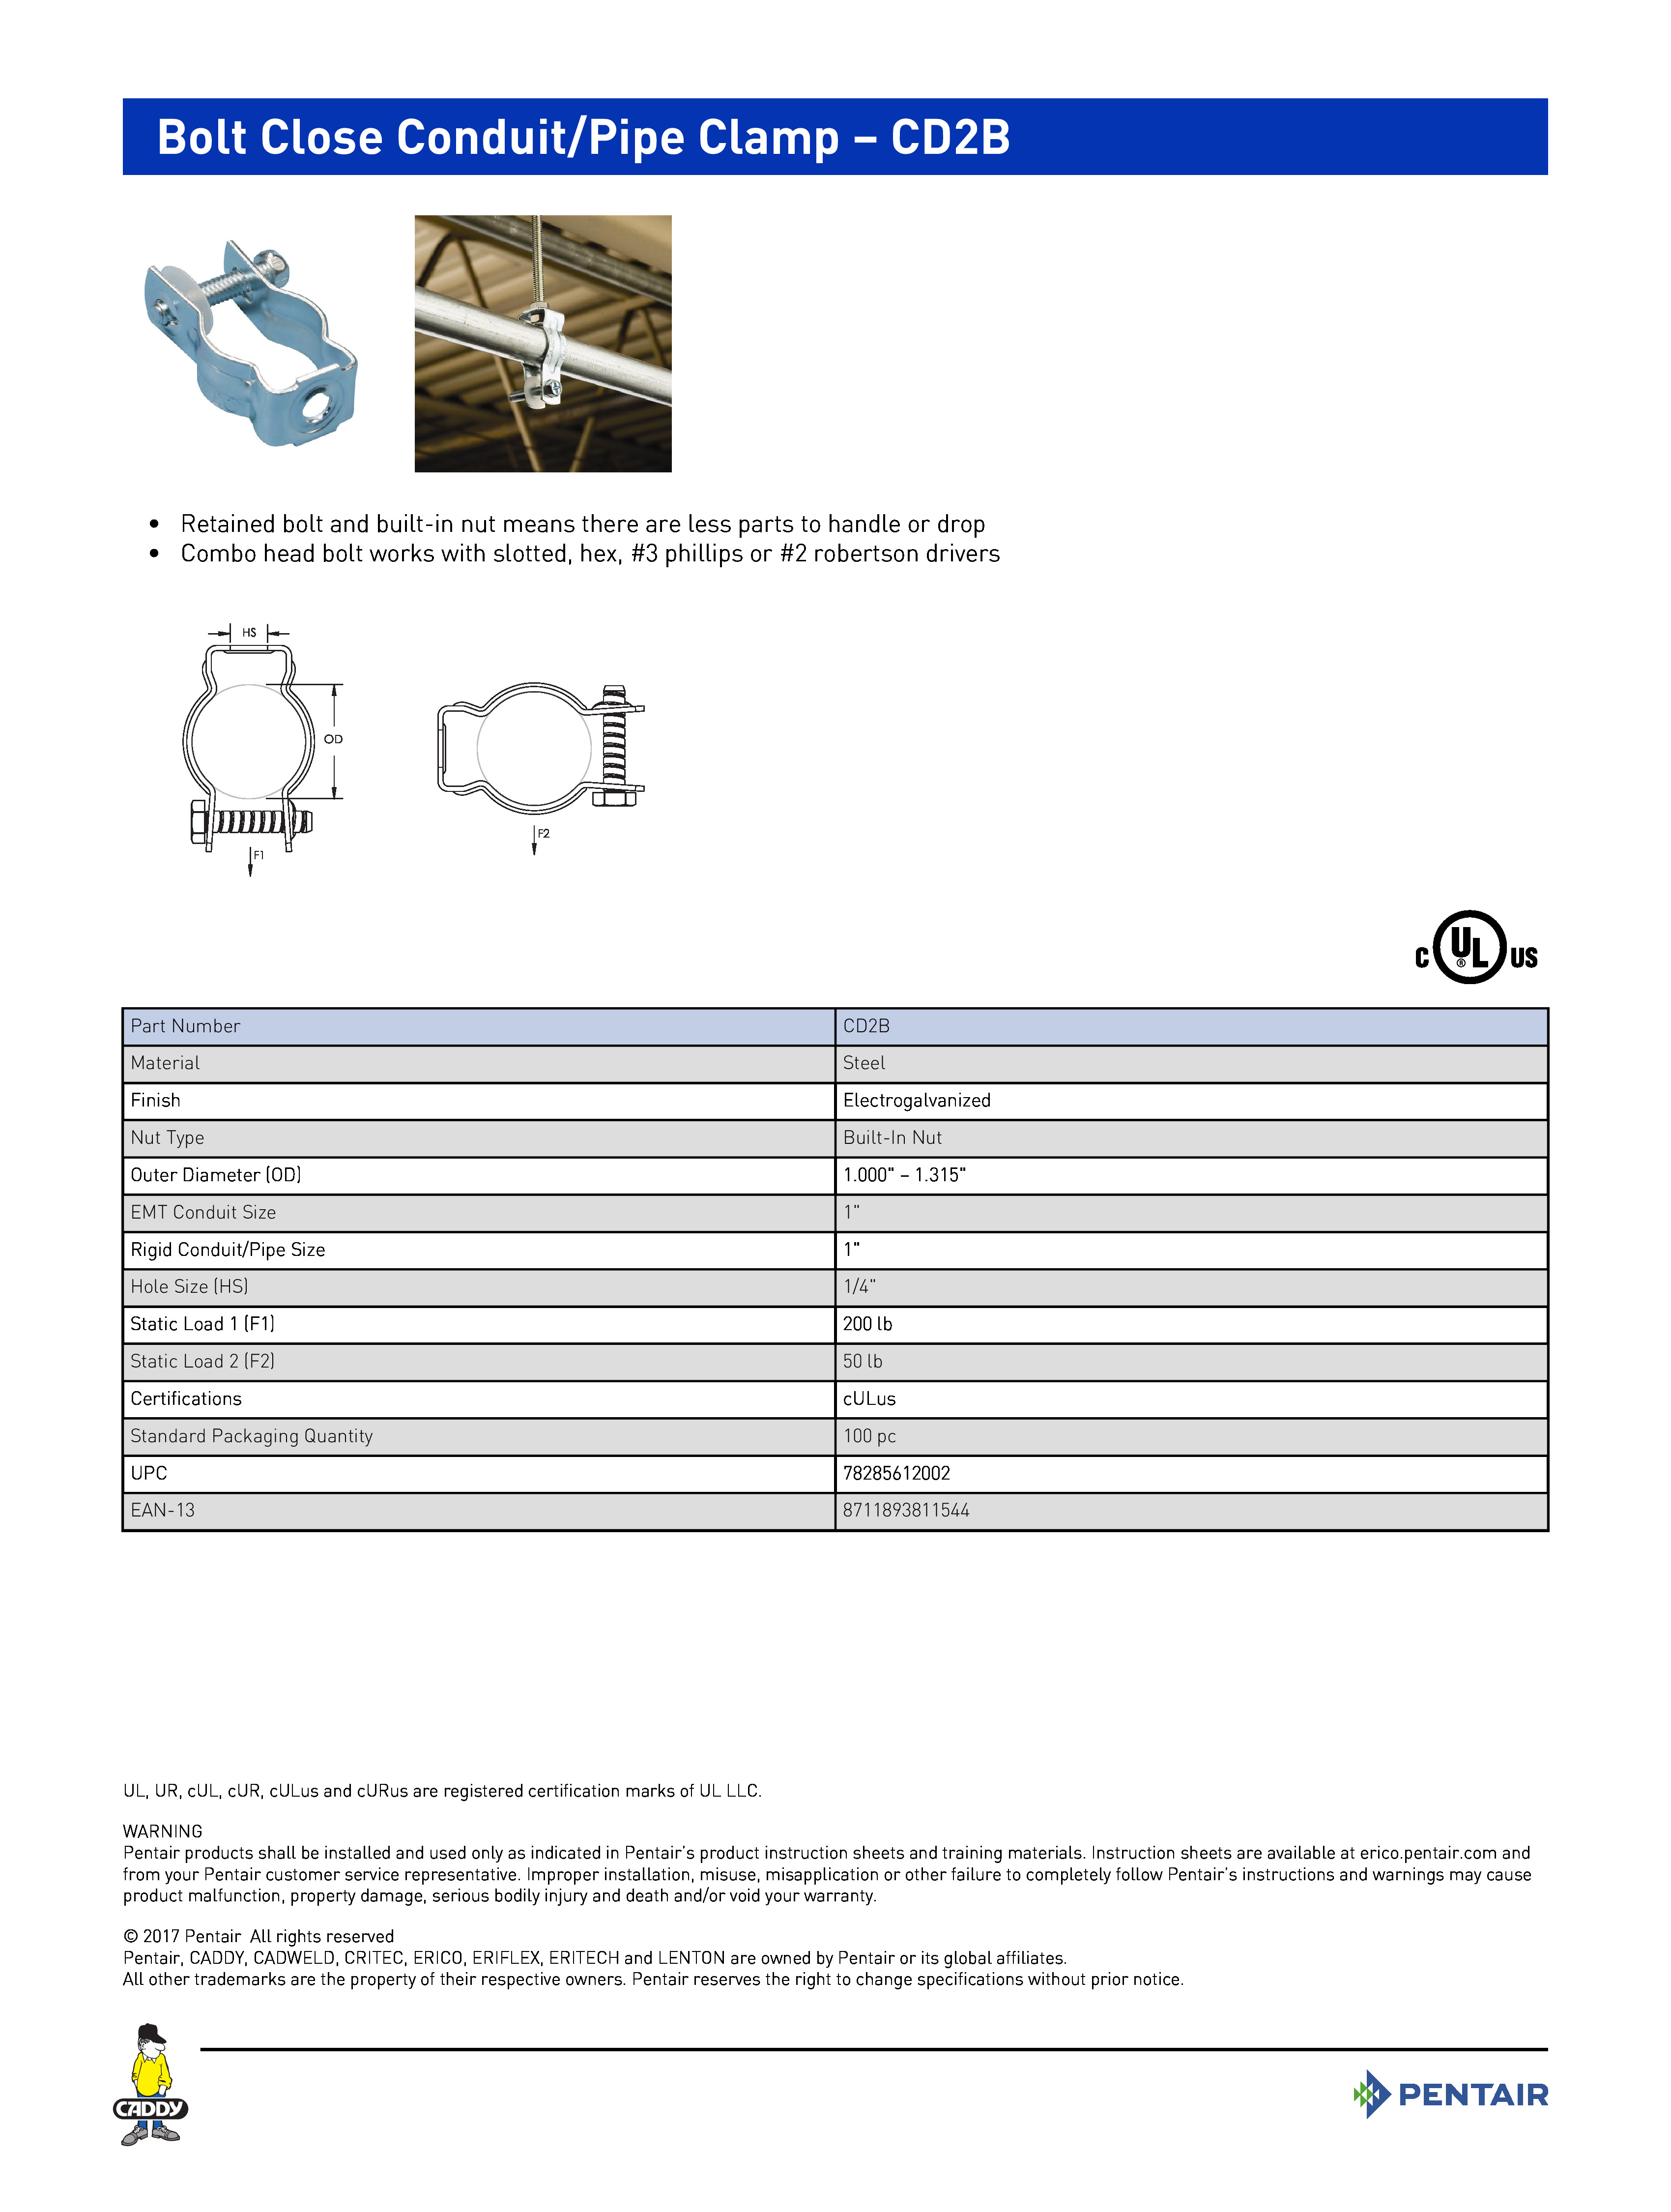 Bolt Close Conduit/Pipe Clamp – CD2B	
 	
•	Retained bolt and built-in nut means there are less parts to handle or drop	
•	Combo head bolt works with slotted, hex, #3 phillips or #2 robertson drivers	
 	
Part NumberCD2BMaterialSteelFinishElectrogalvanizedNut TypeBuilt-In NutOuter Diameter (OD)1.000" – 1.315"EMT Conduit Size1"Rigid Conduit/Pipe Size1"Hole Size (HS)1/4"Static Load 1 (F1)200 lbStatic Load 2 (F2)50 lbCertificationscULusStandard Packaging Quantity100 pcUPC78285612002EAN-138711893811544
UL, UR, cUL, cUR, cULus and cURus are registered certification marks of UL LLC. WARNINGPentair products shall be installed and used only as indicated in Pentair’s product instruction sheets and training materials. Instruction sheets are available at erico.pentair.com andfrom your Pentair customer service representative. Improper installation, misuse, misapplication or other failure to completely follow Pentair’s instructions and warnings may causeproduct malfunction, property damage, serious bodily injury and death and/or void your warranty. 